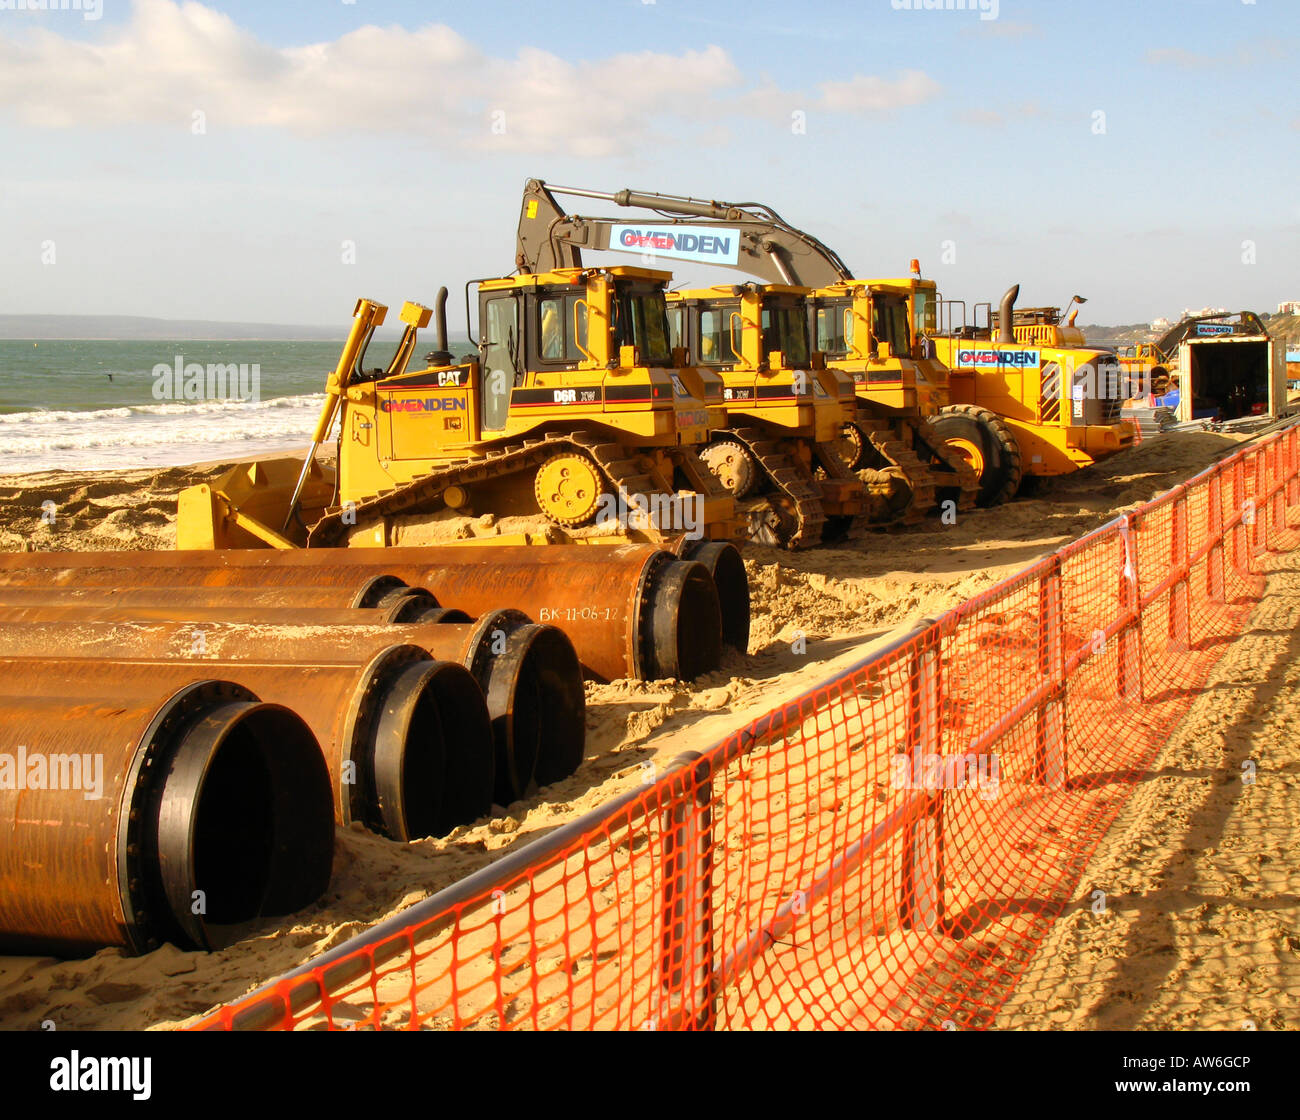 Construction vehicles on Boscombe beach, Bournemouth, Britain, seprated from pedestrian area by orange netting. Stock Photo